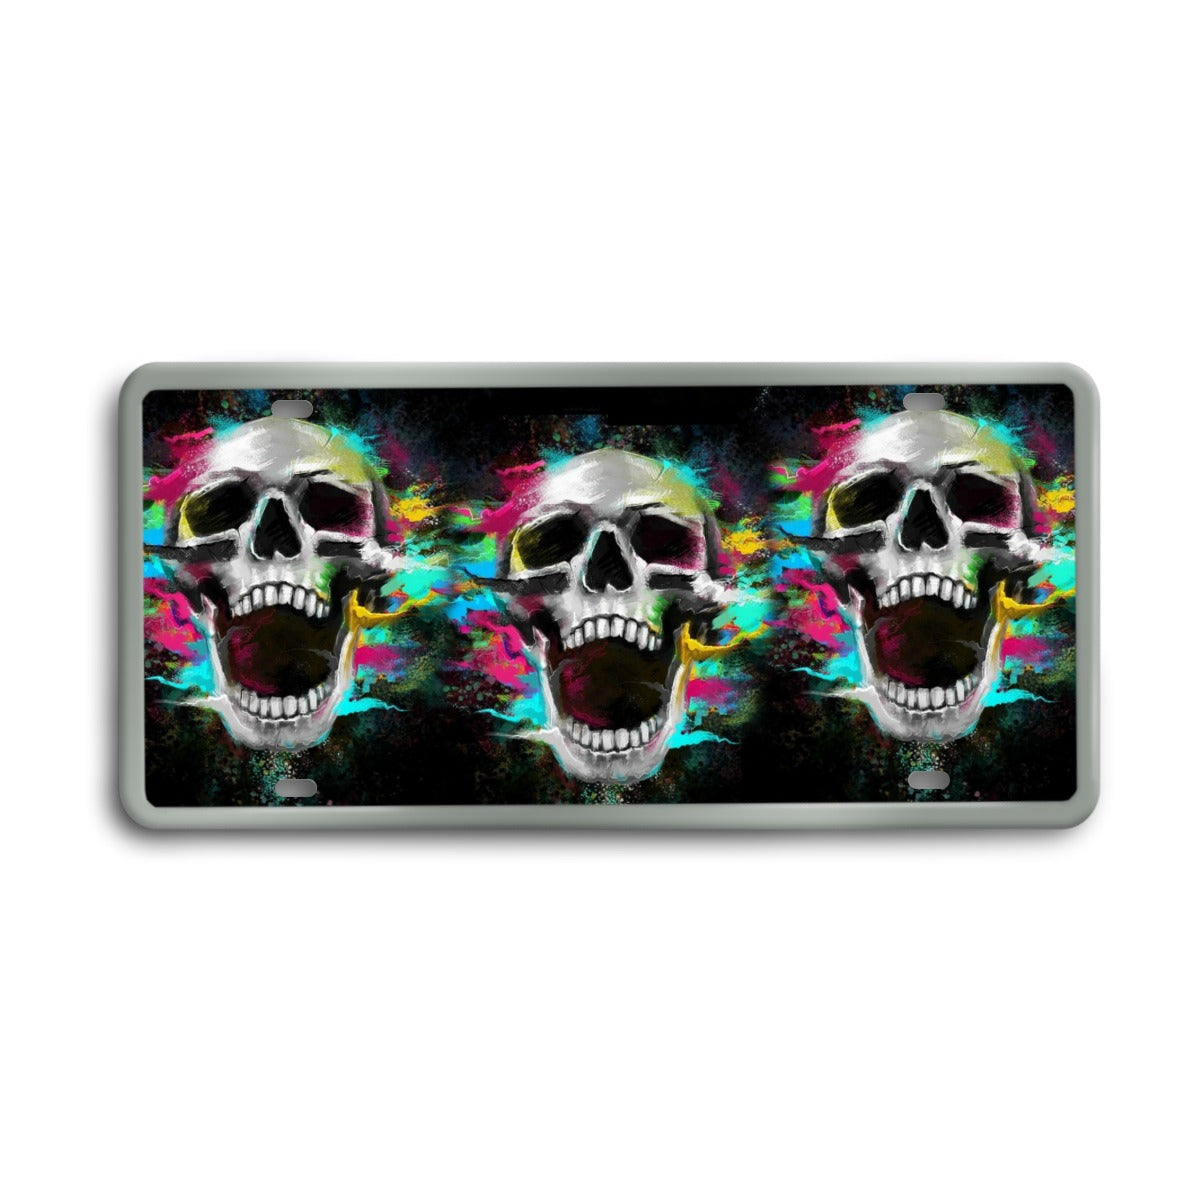 Skull gothic Halloween Vintage License Plate Decoration Painting, Grim reaper license plates